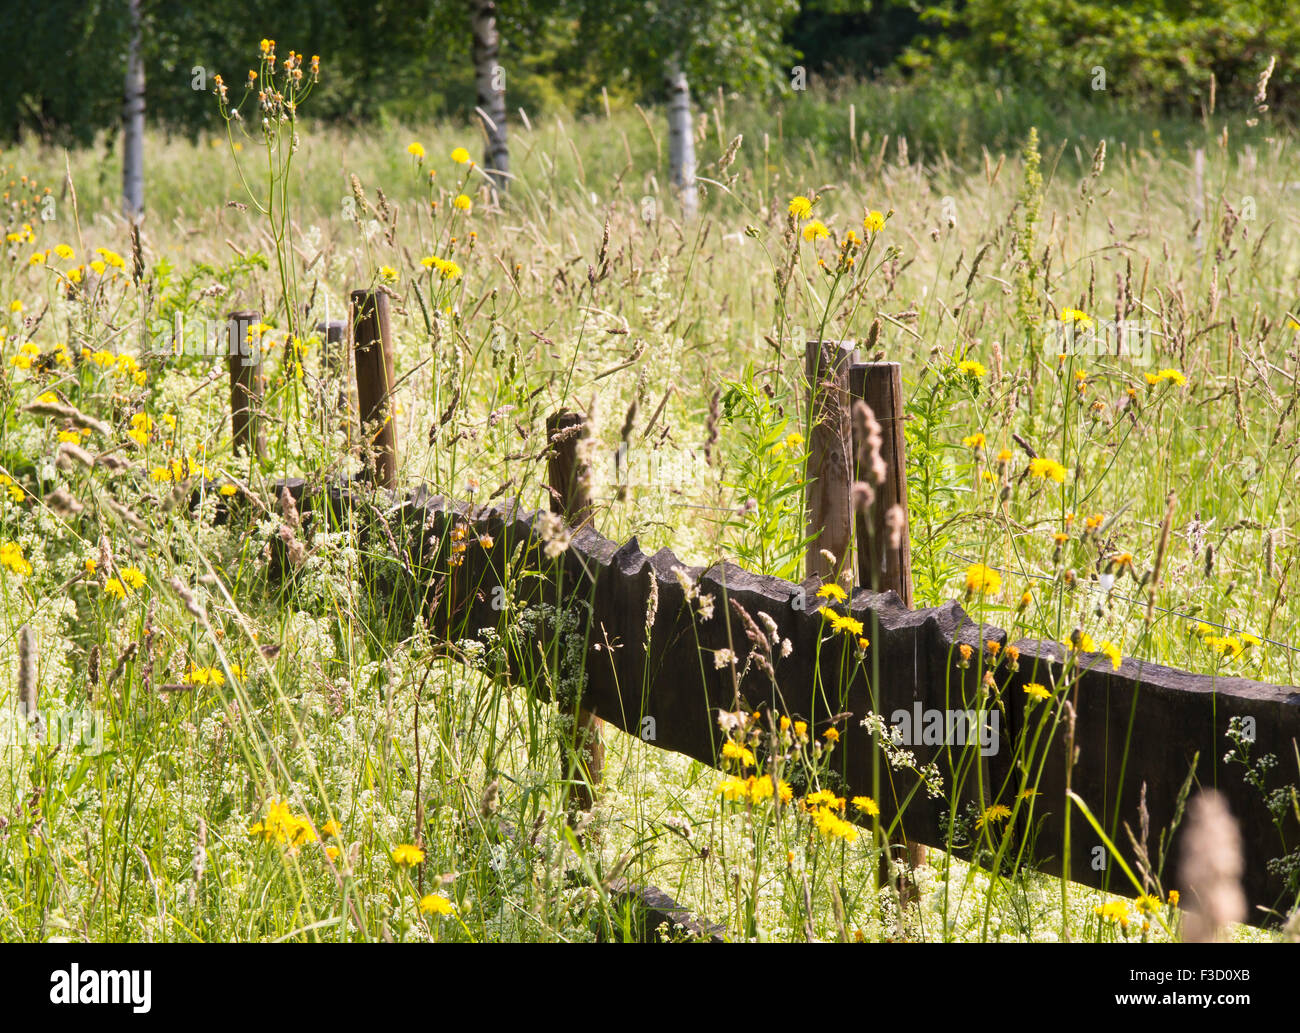 Impressions of summer, romantic and idyllic meadow with yellow and white flowers, looking over a brown wooden fence Stock Photo